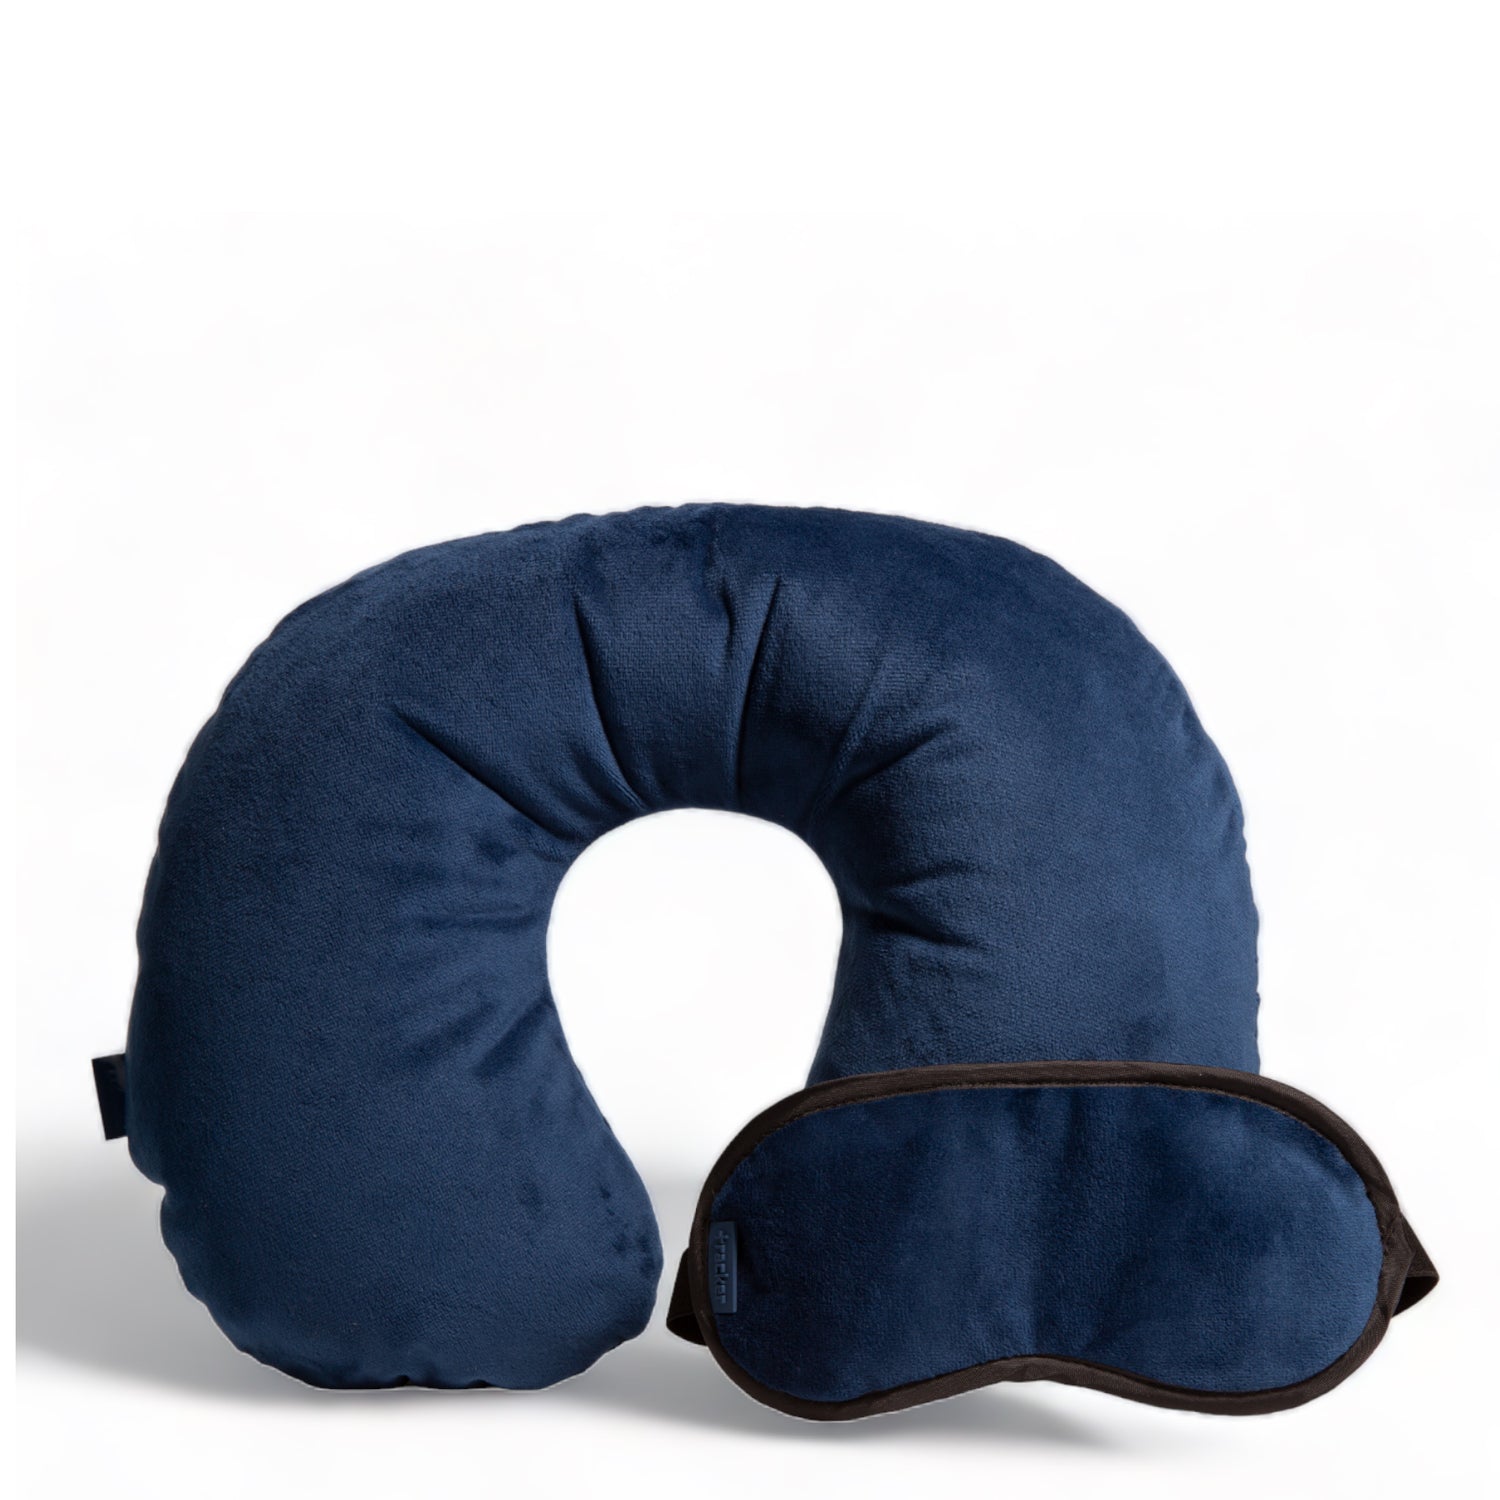 Navy blue travel pillow and eye mask designed by Tracker showing their plush fleece textures, and both are leaning on each other.